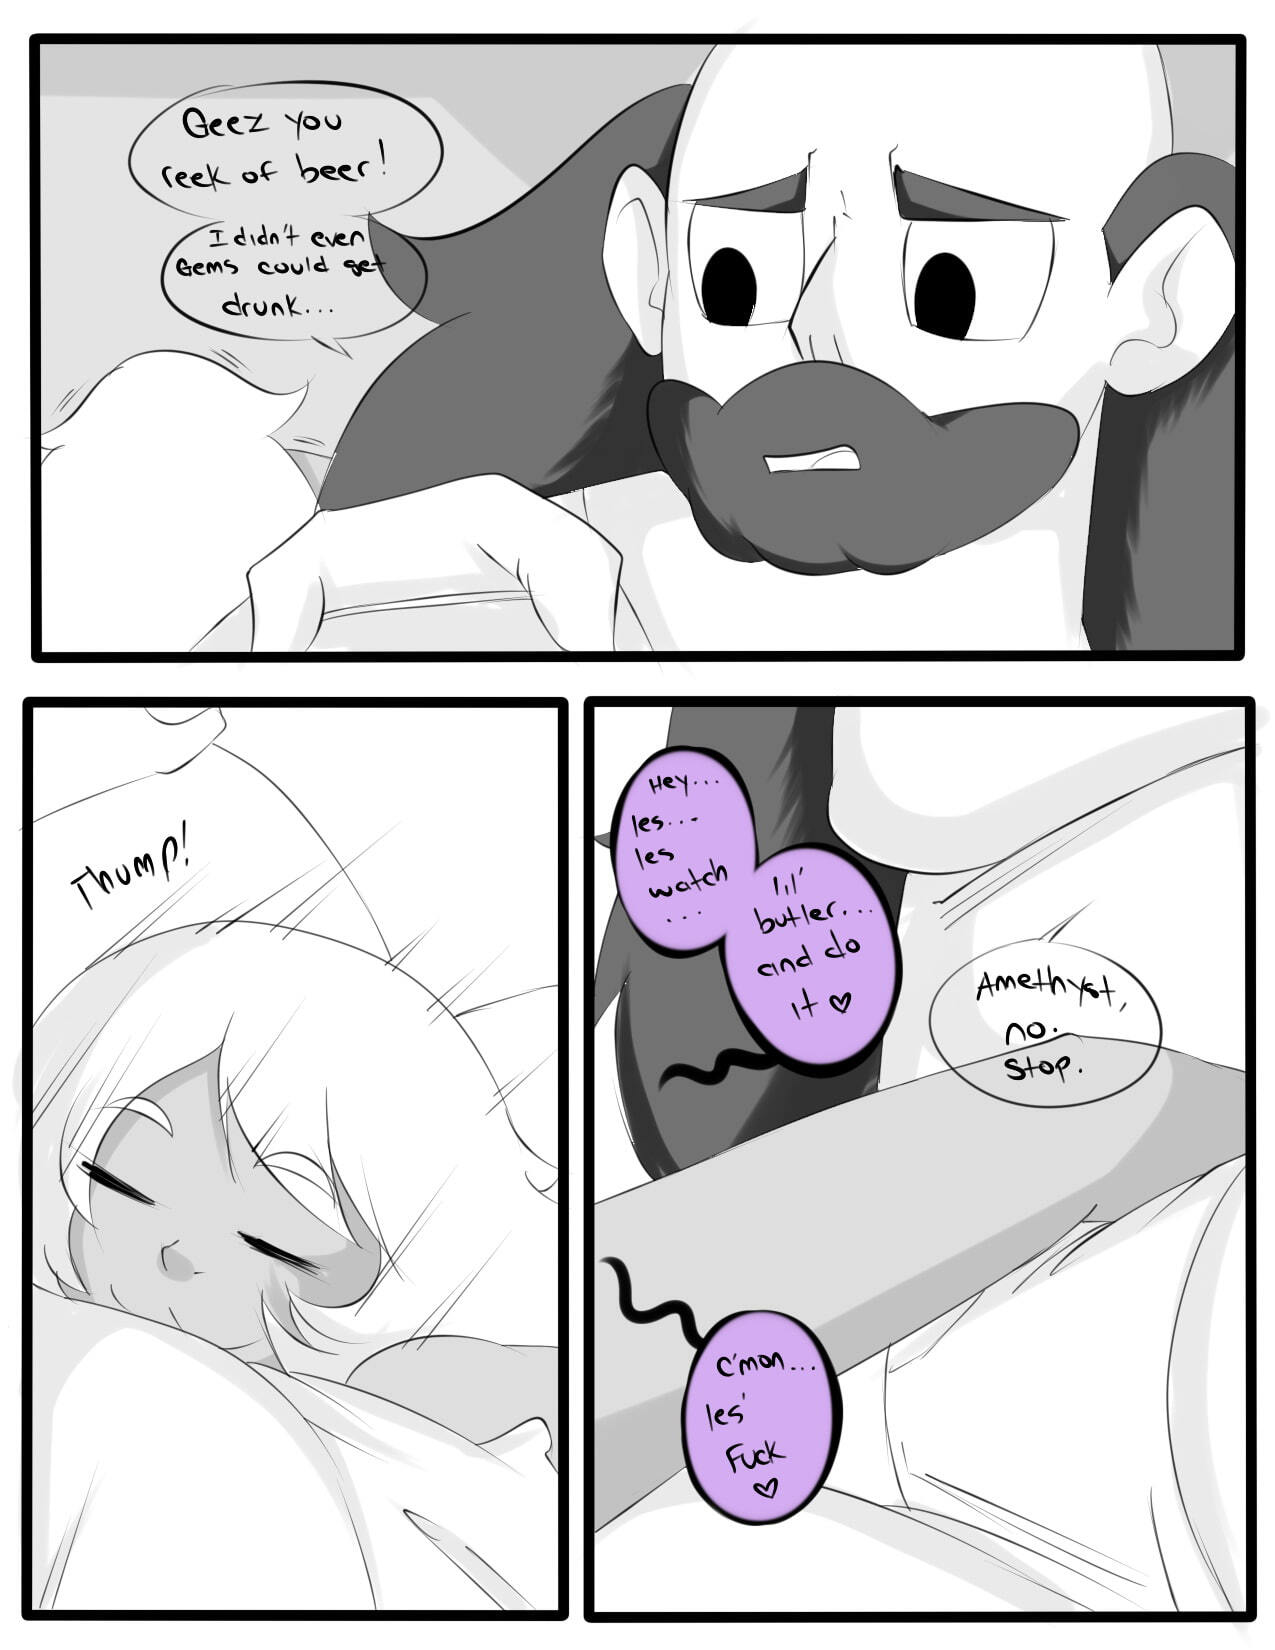 Amethyst's drinking problem - Page 2